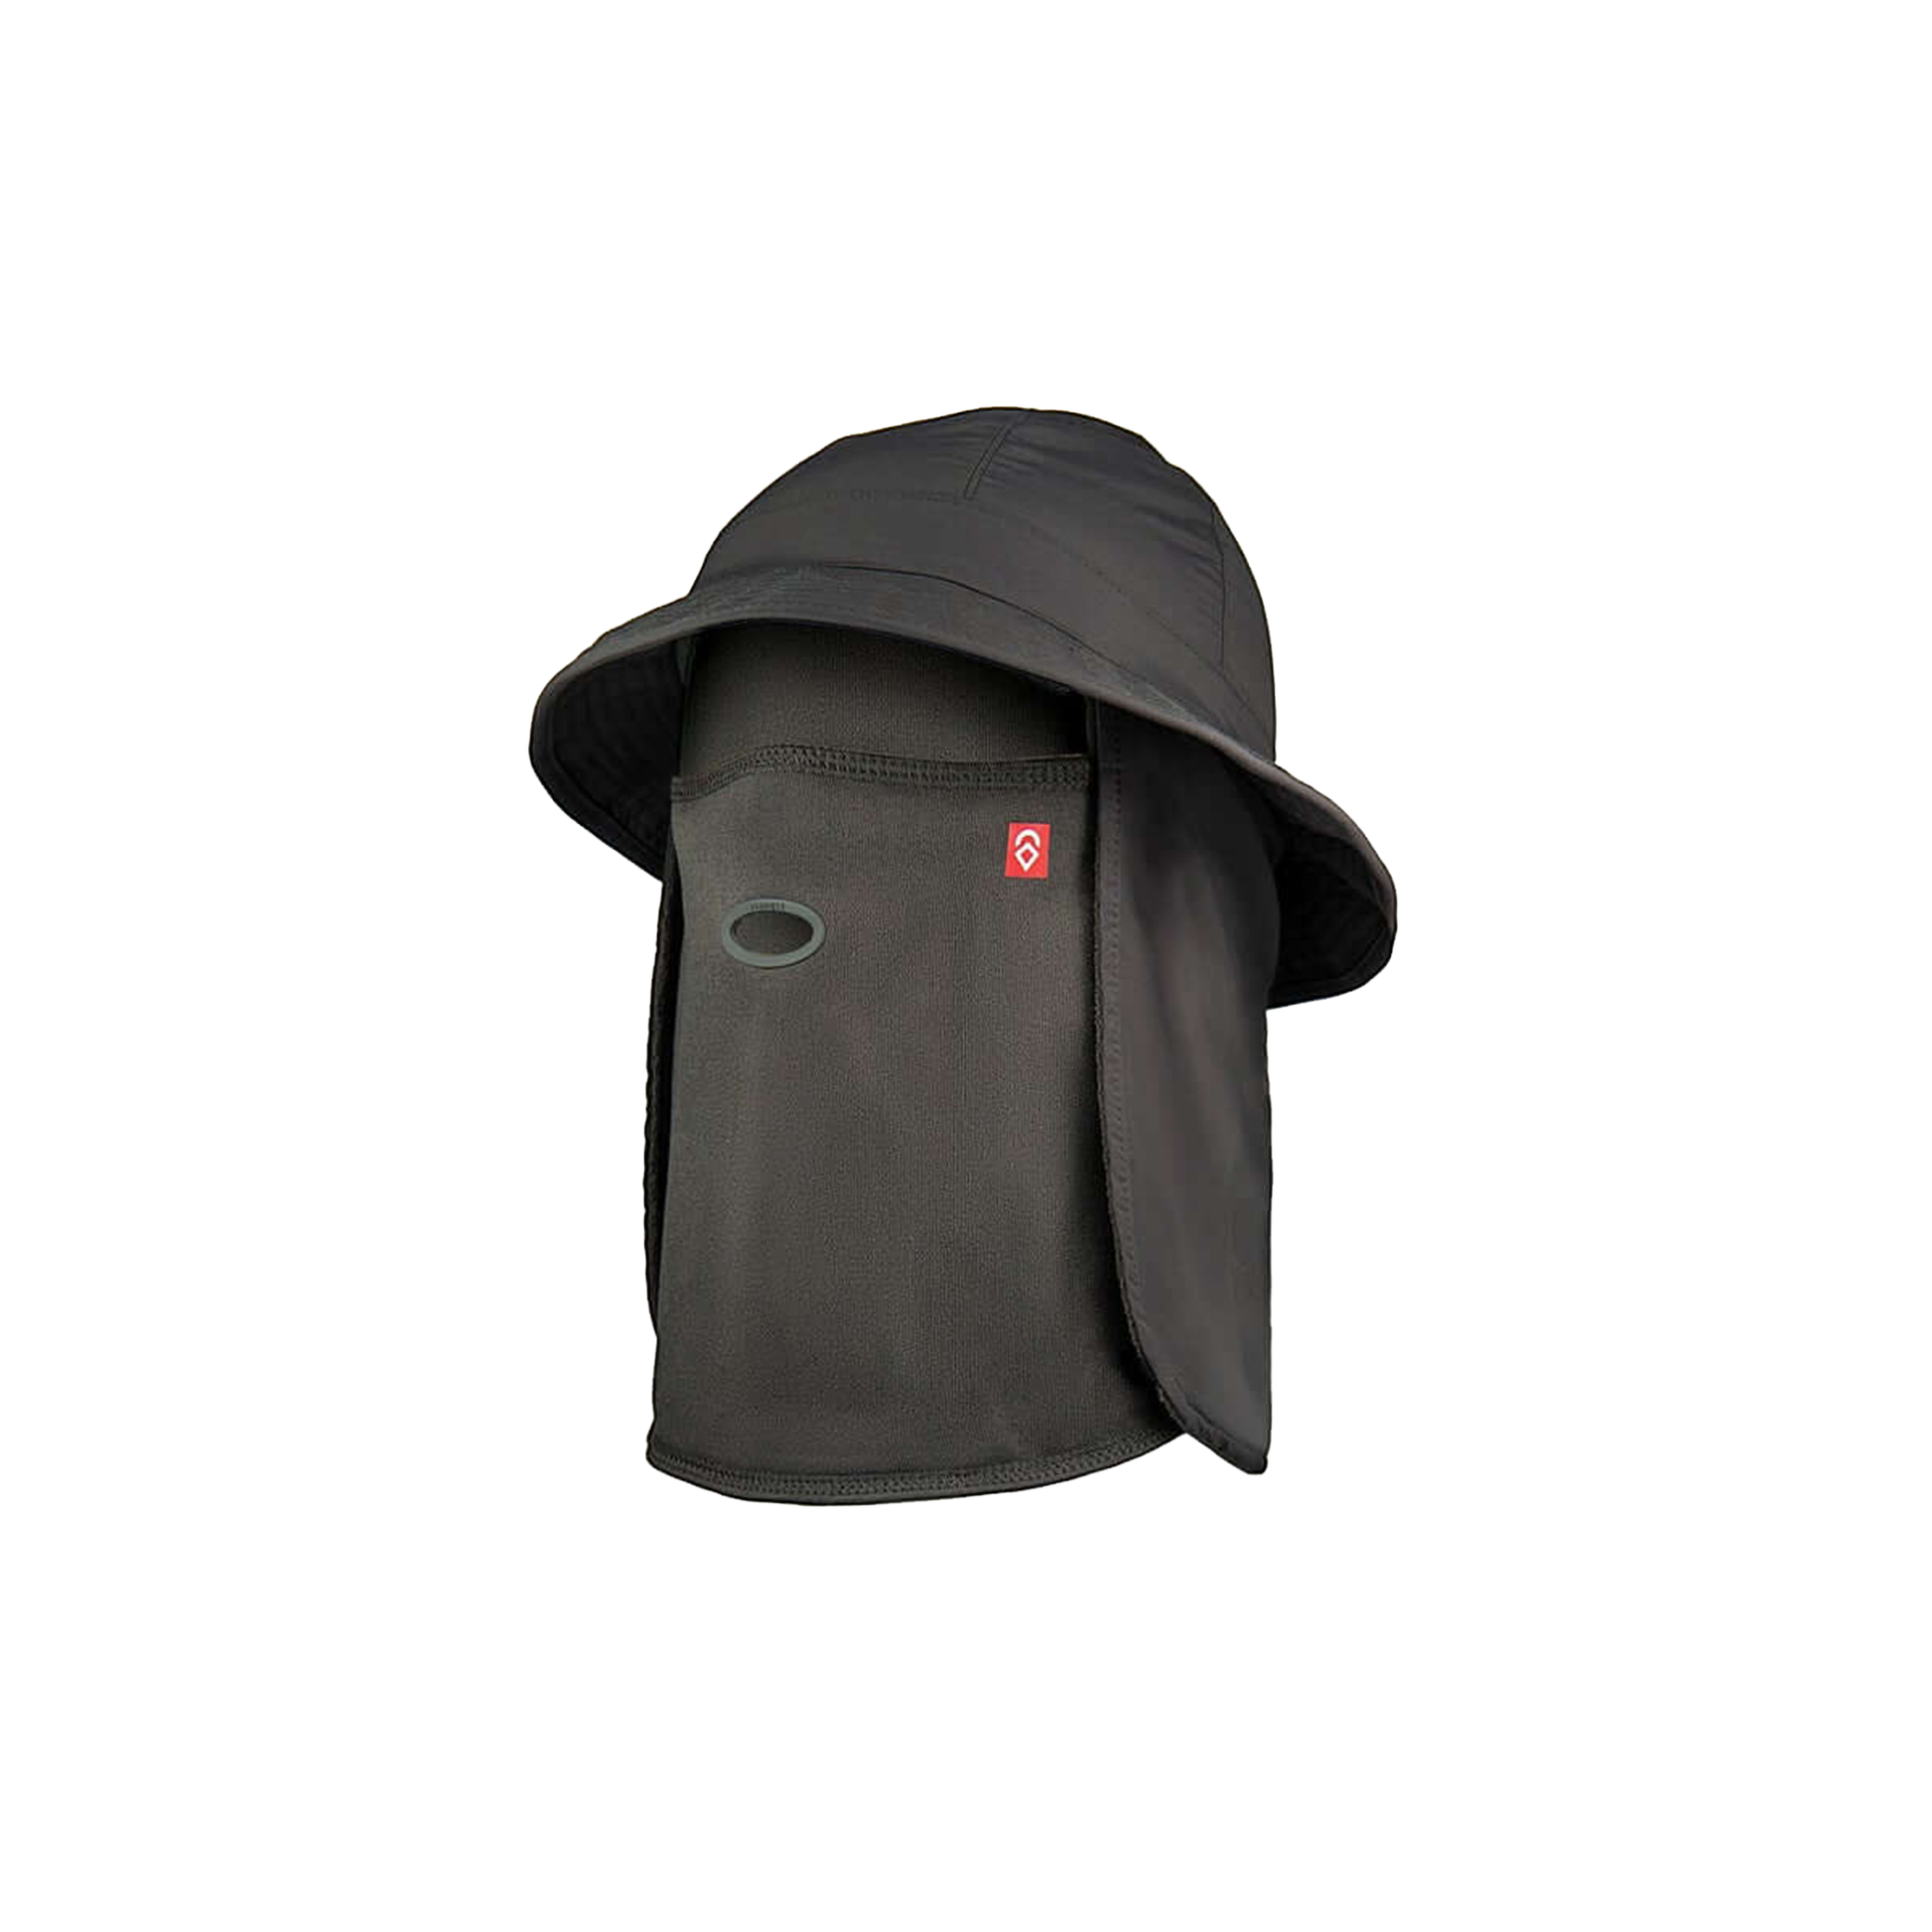 Airhole Bucket 3 Layer Charcoal S\M Neck Warmers & Face Masks